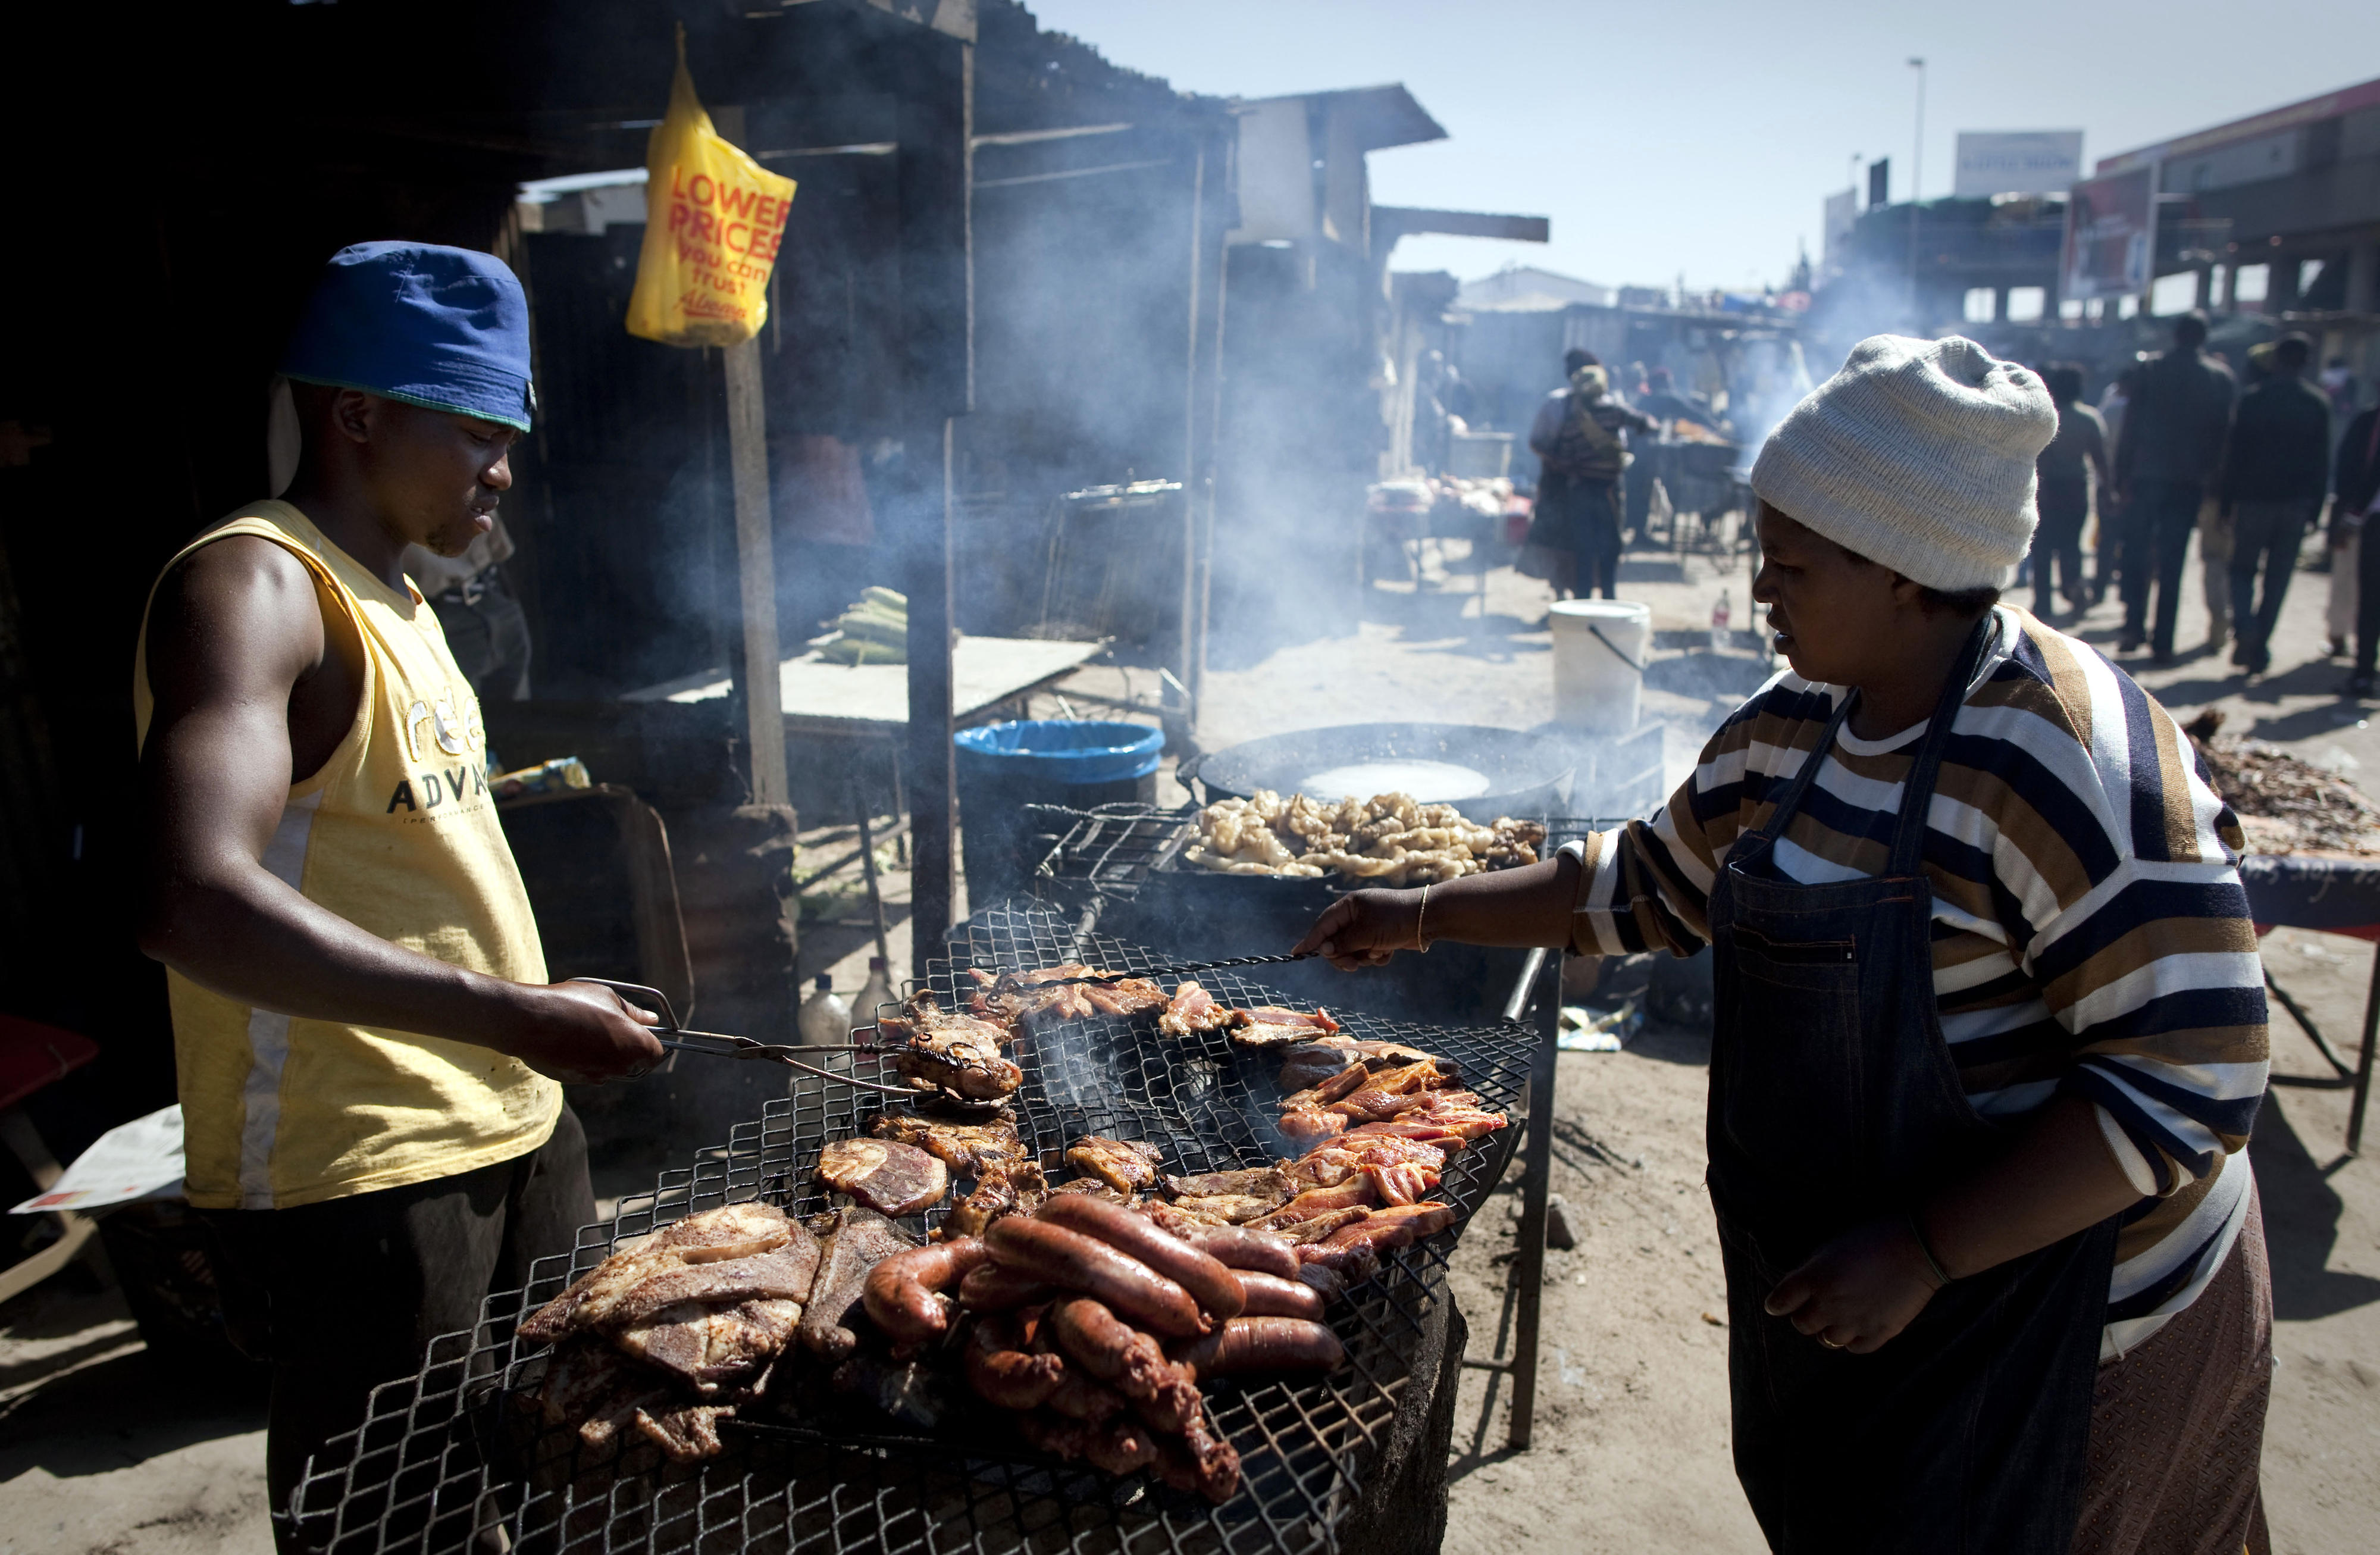 People in a slum on the outskirts of Cape Town